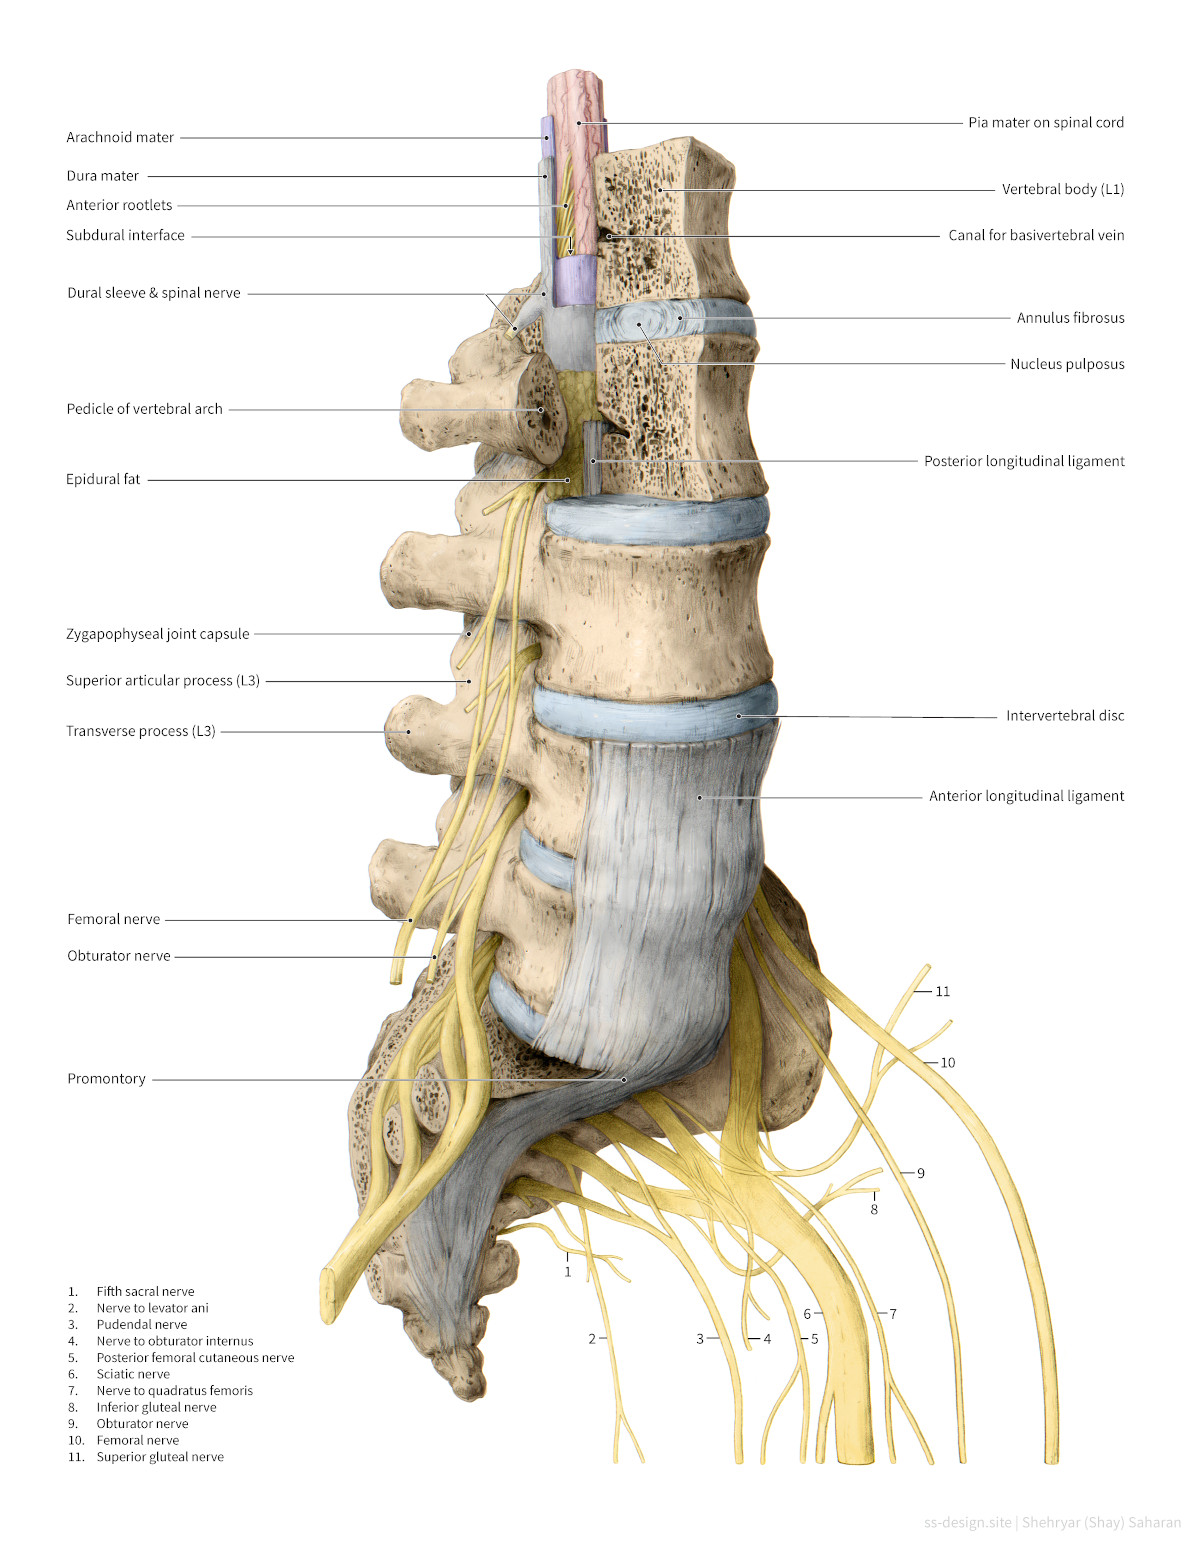 A detailed lifelike illustration of a section of the human spine and sacrum. It is labeled in detail.